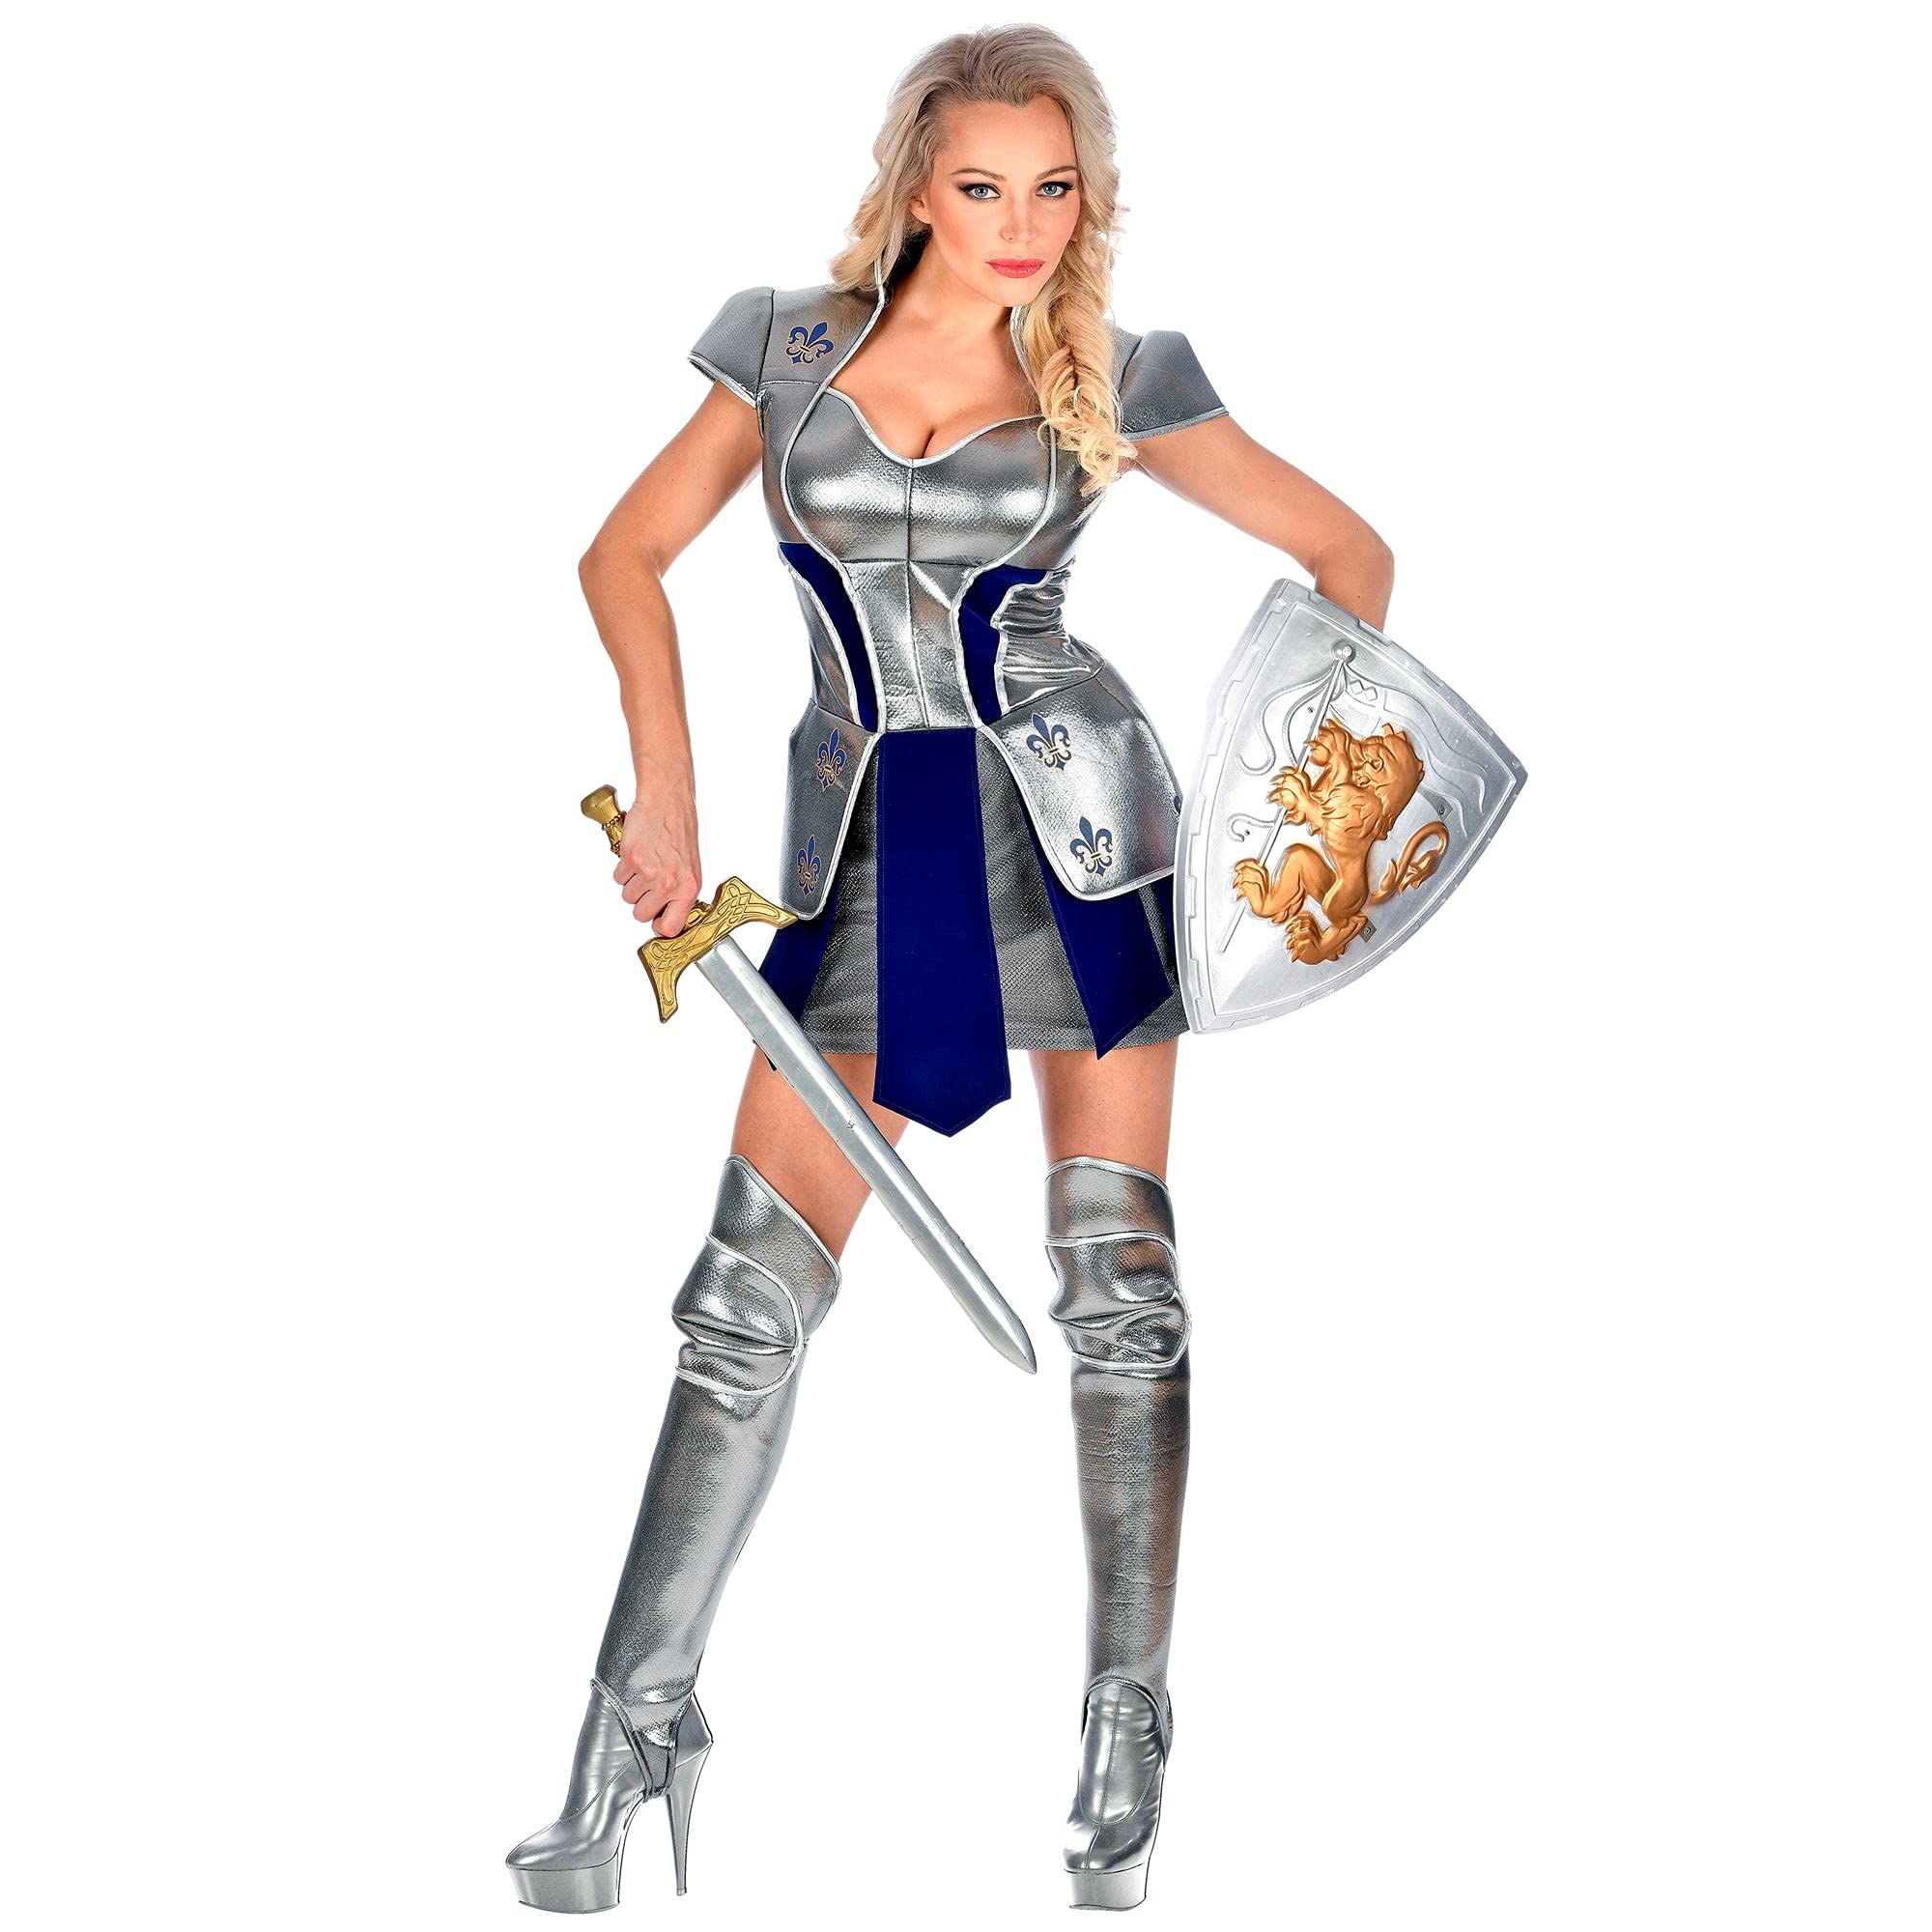 "KNIGHT" (dress with armour, shincovers) - (S)